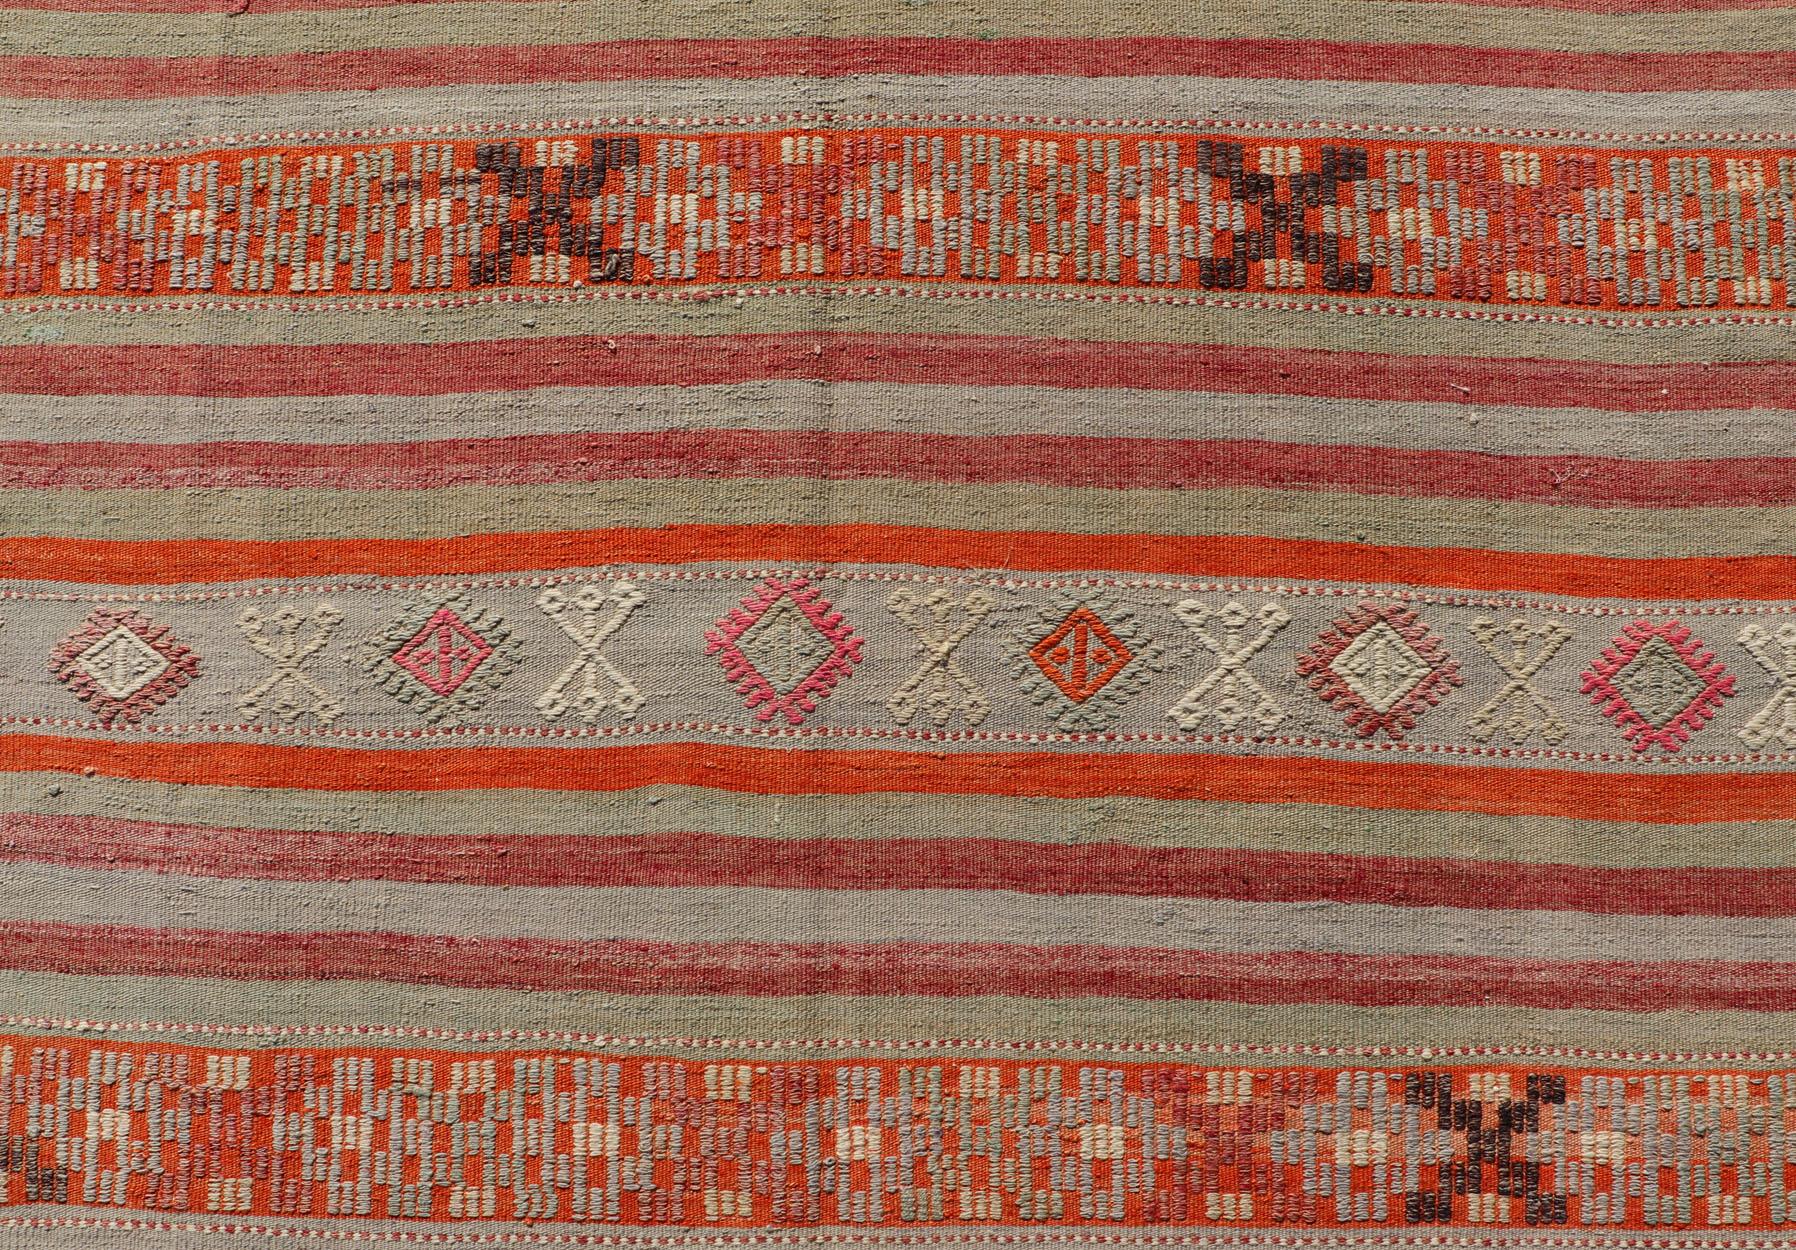 Vintage Turkish Kilim with Colorful Stripes in Orange, Lt. green, red & gray  For Sale 5